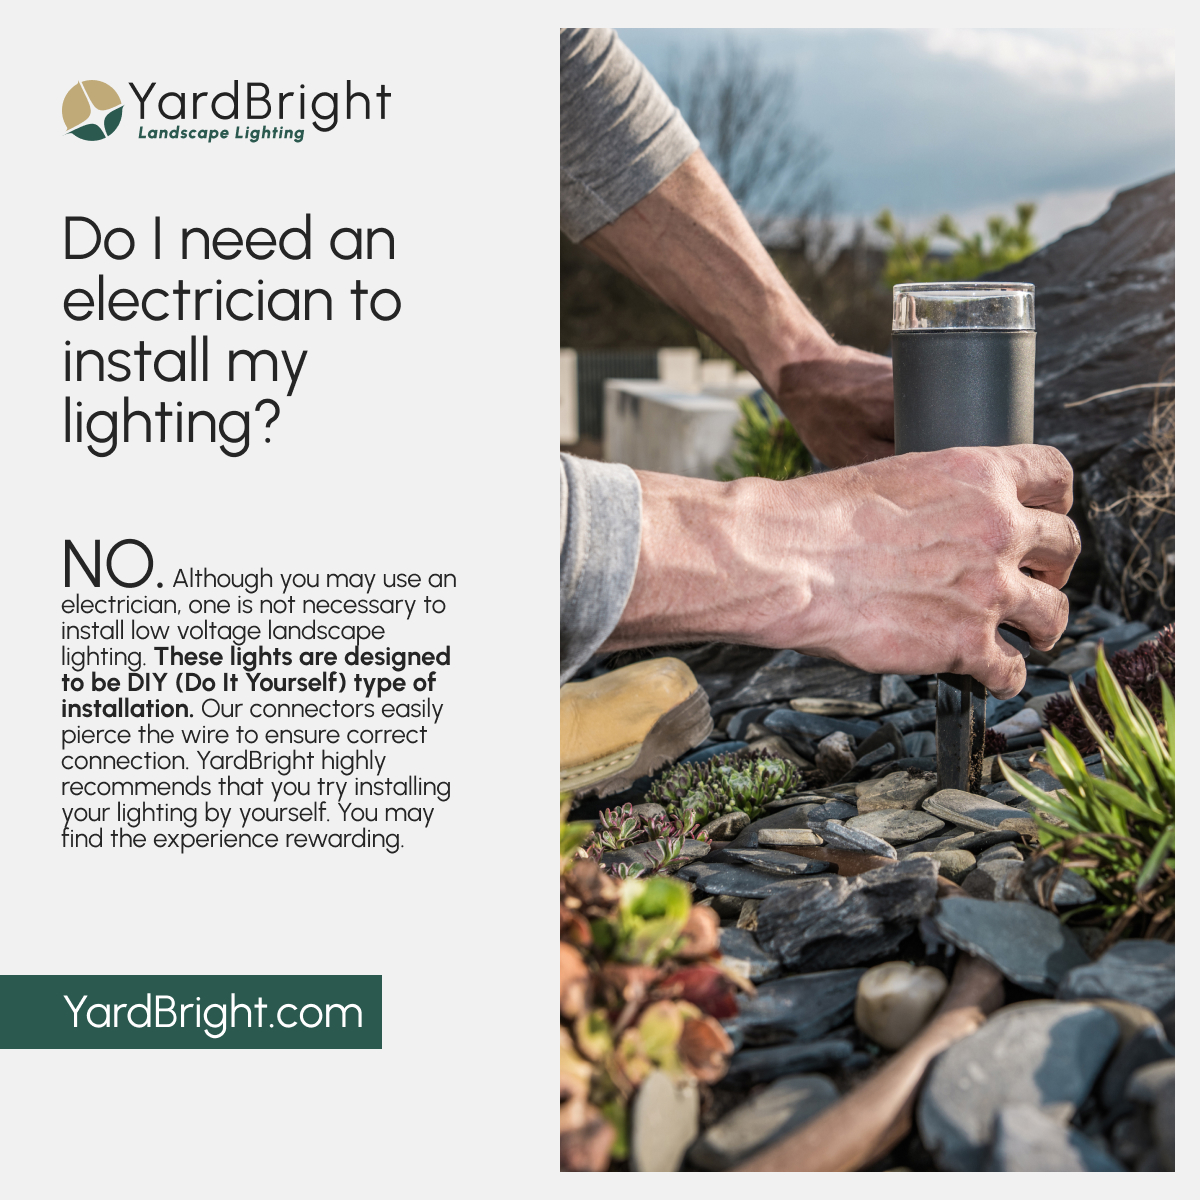 Do you need an electrician to install our lighting products? Nope! 

Our lights are designed to be DIY type of installation, but if you need assistance – we’re always happy to chat. Have questions? Contact us here: yardbright.com/contact-us/ 

#outdoorlighting #landscapedesign